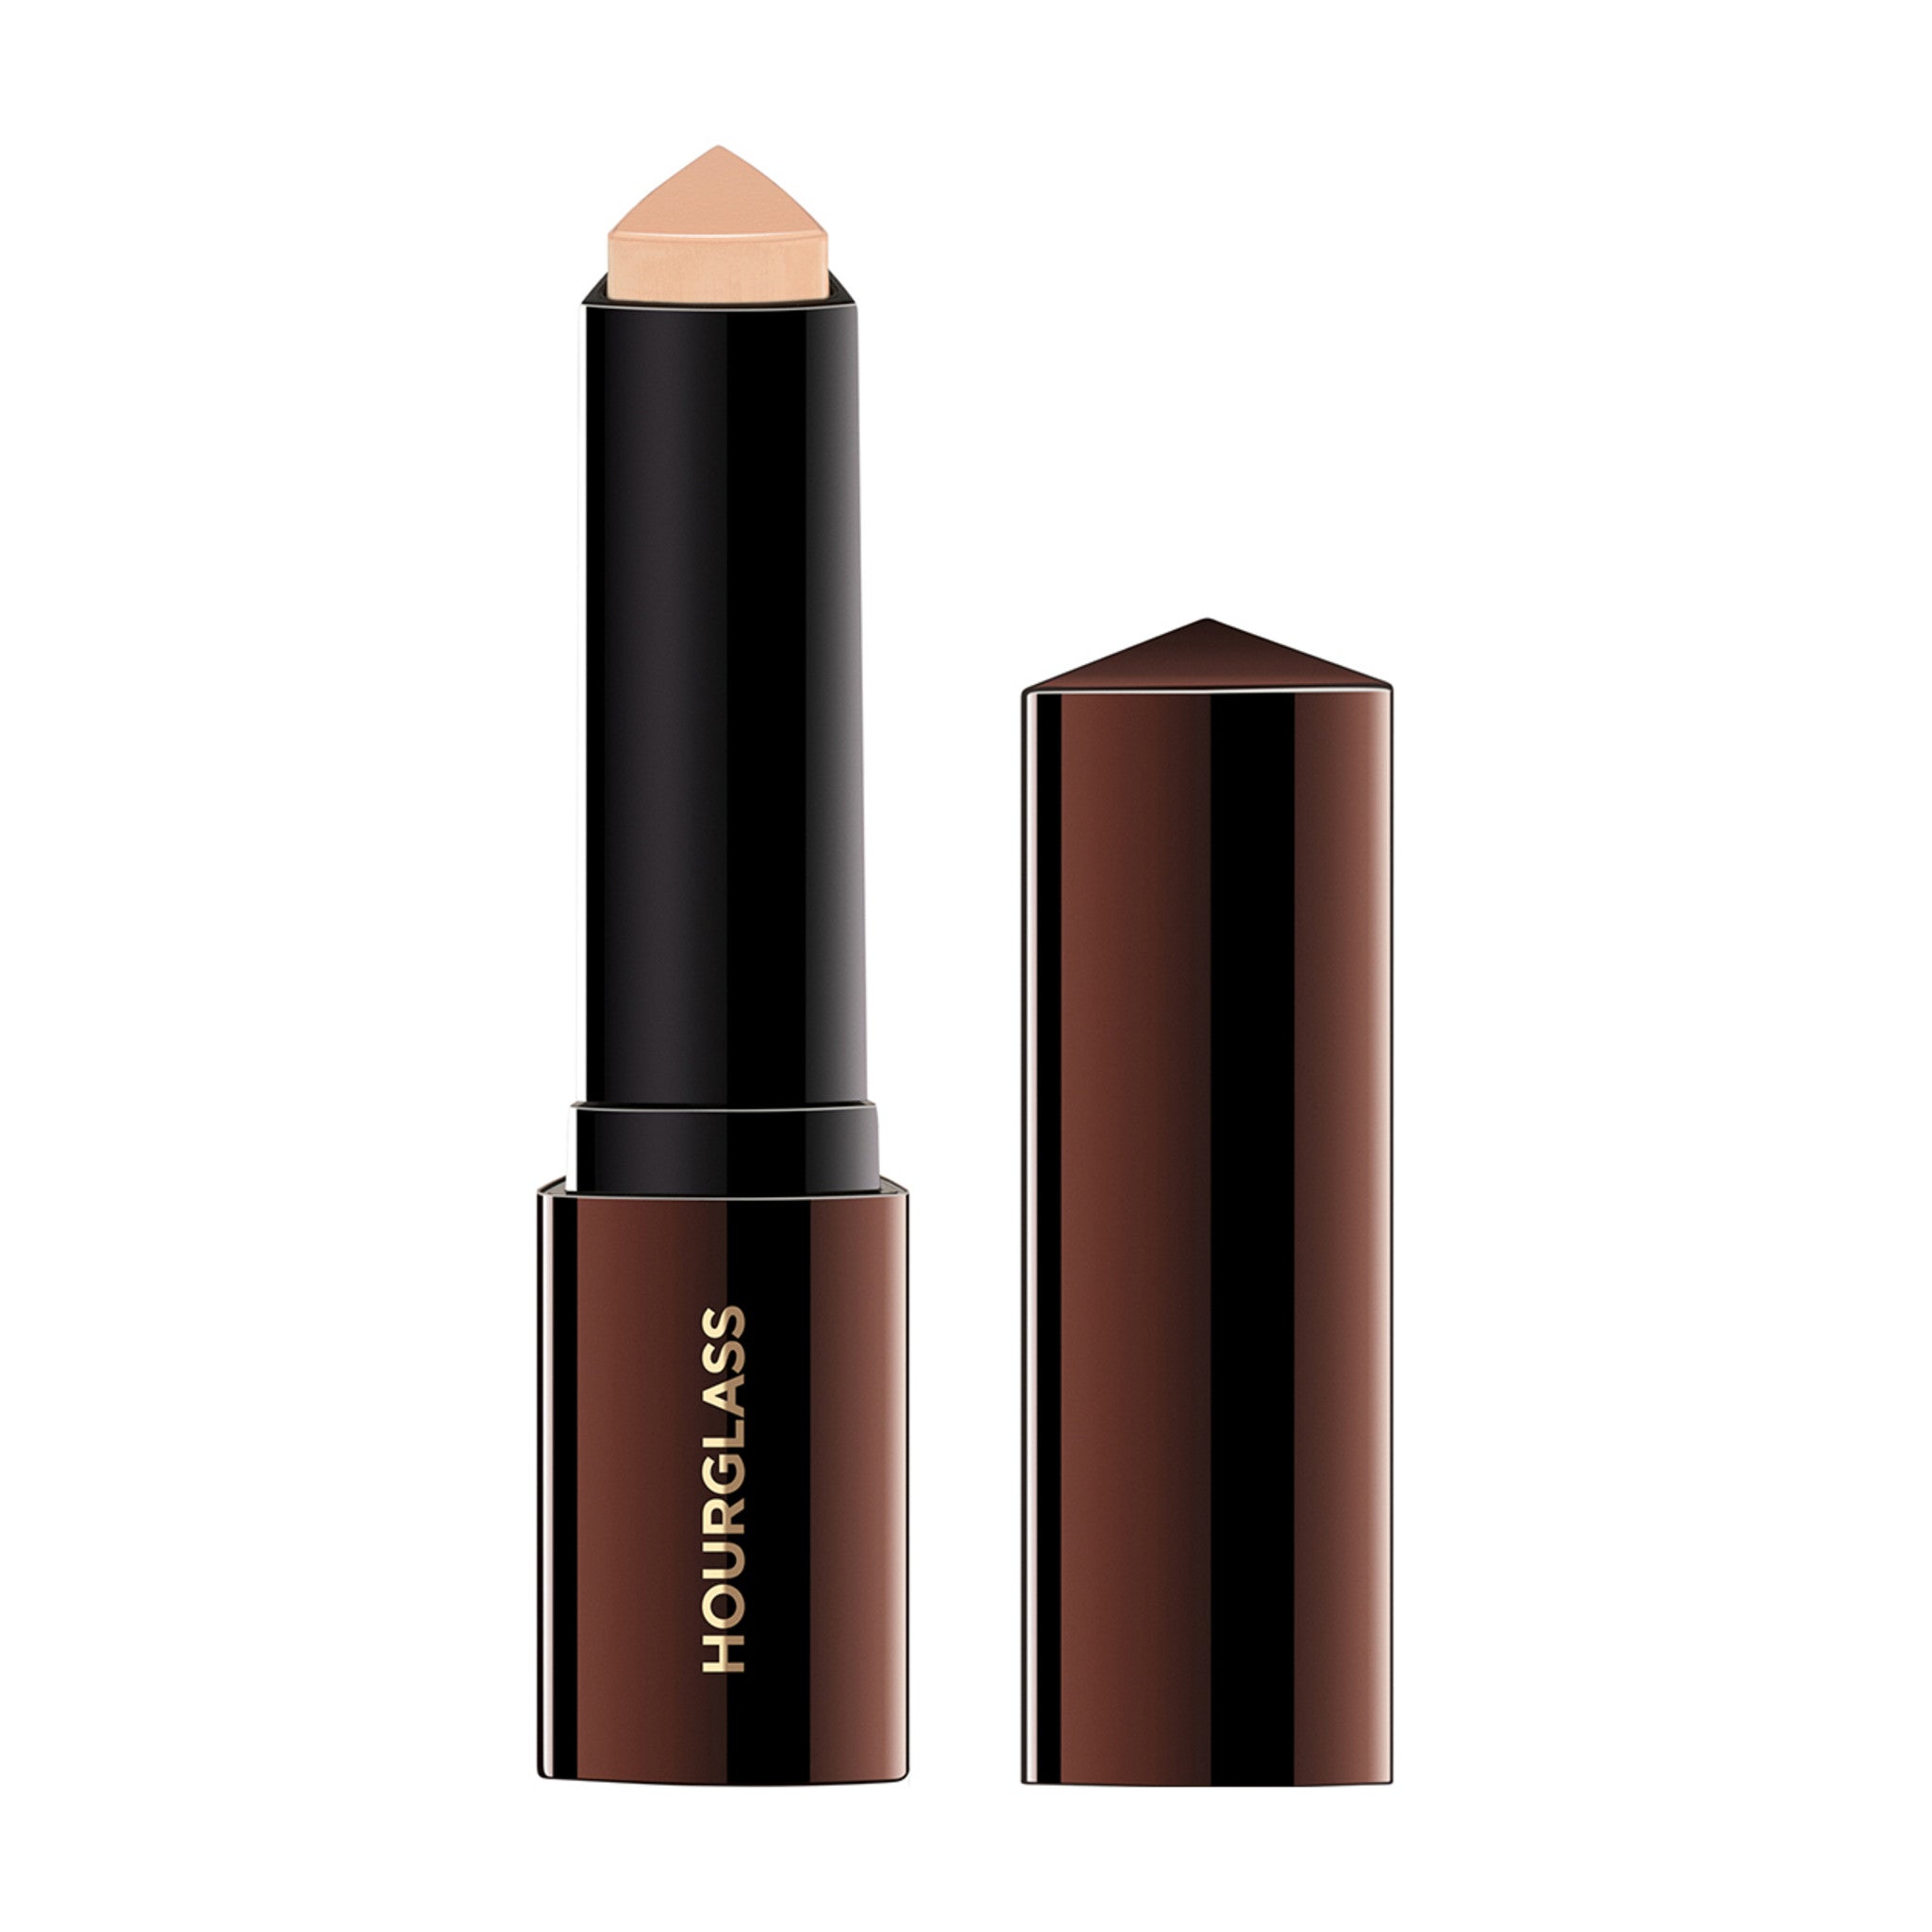 Hourglass Vanish Seamless Finish Foundation Stick Color/Shade variant: Alabaster 2.5 main image. This product is for light cool complexions